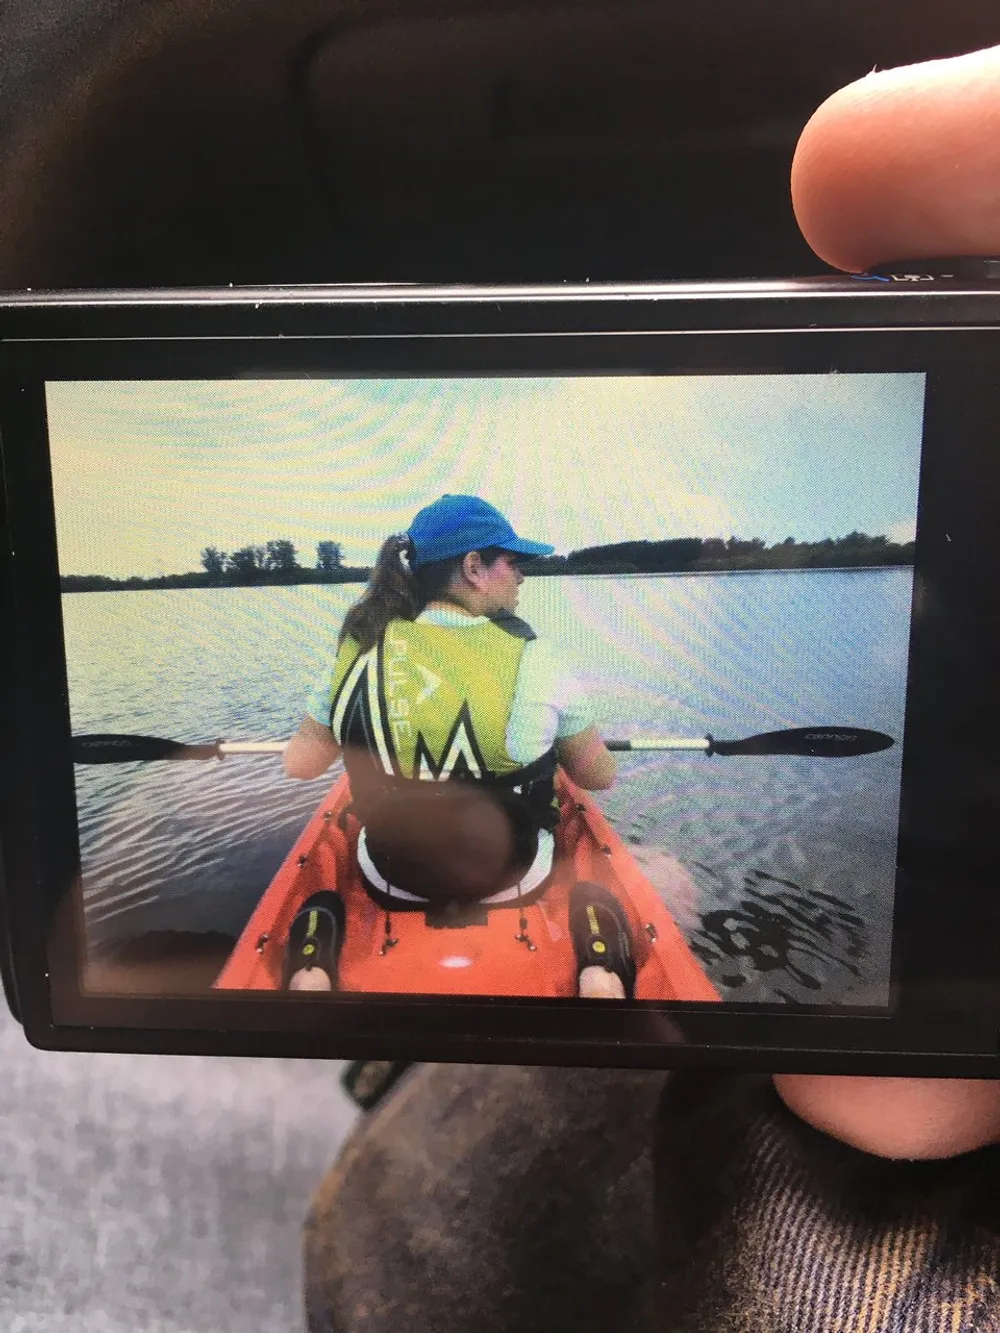 A person is kayaking on a calm body of water viewed over the shoulder from a cameras display screen